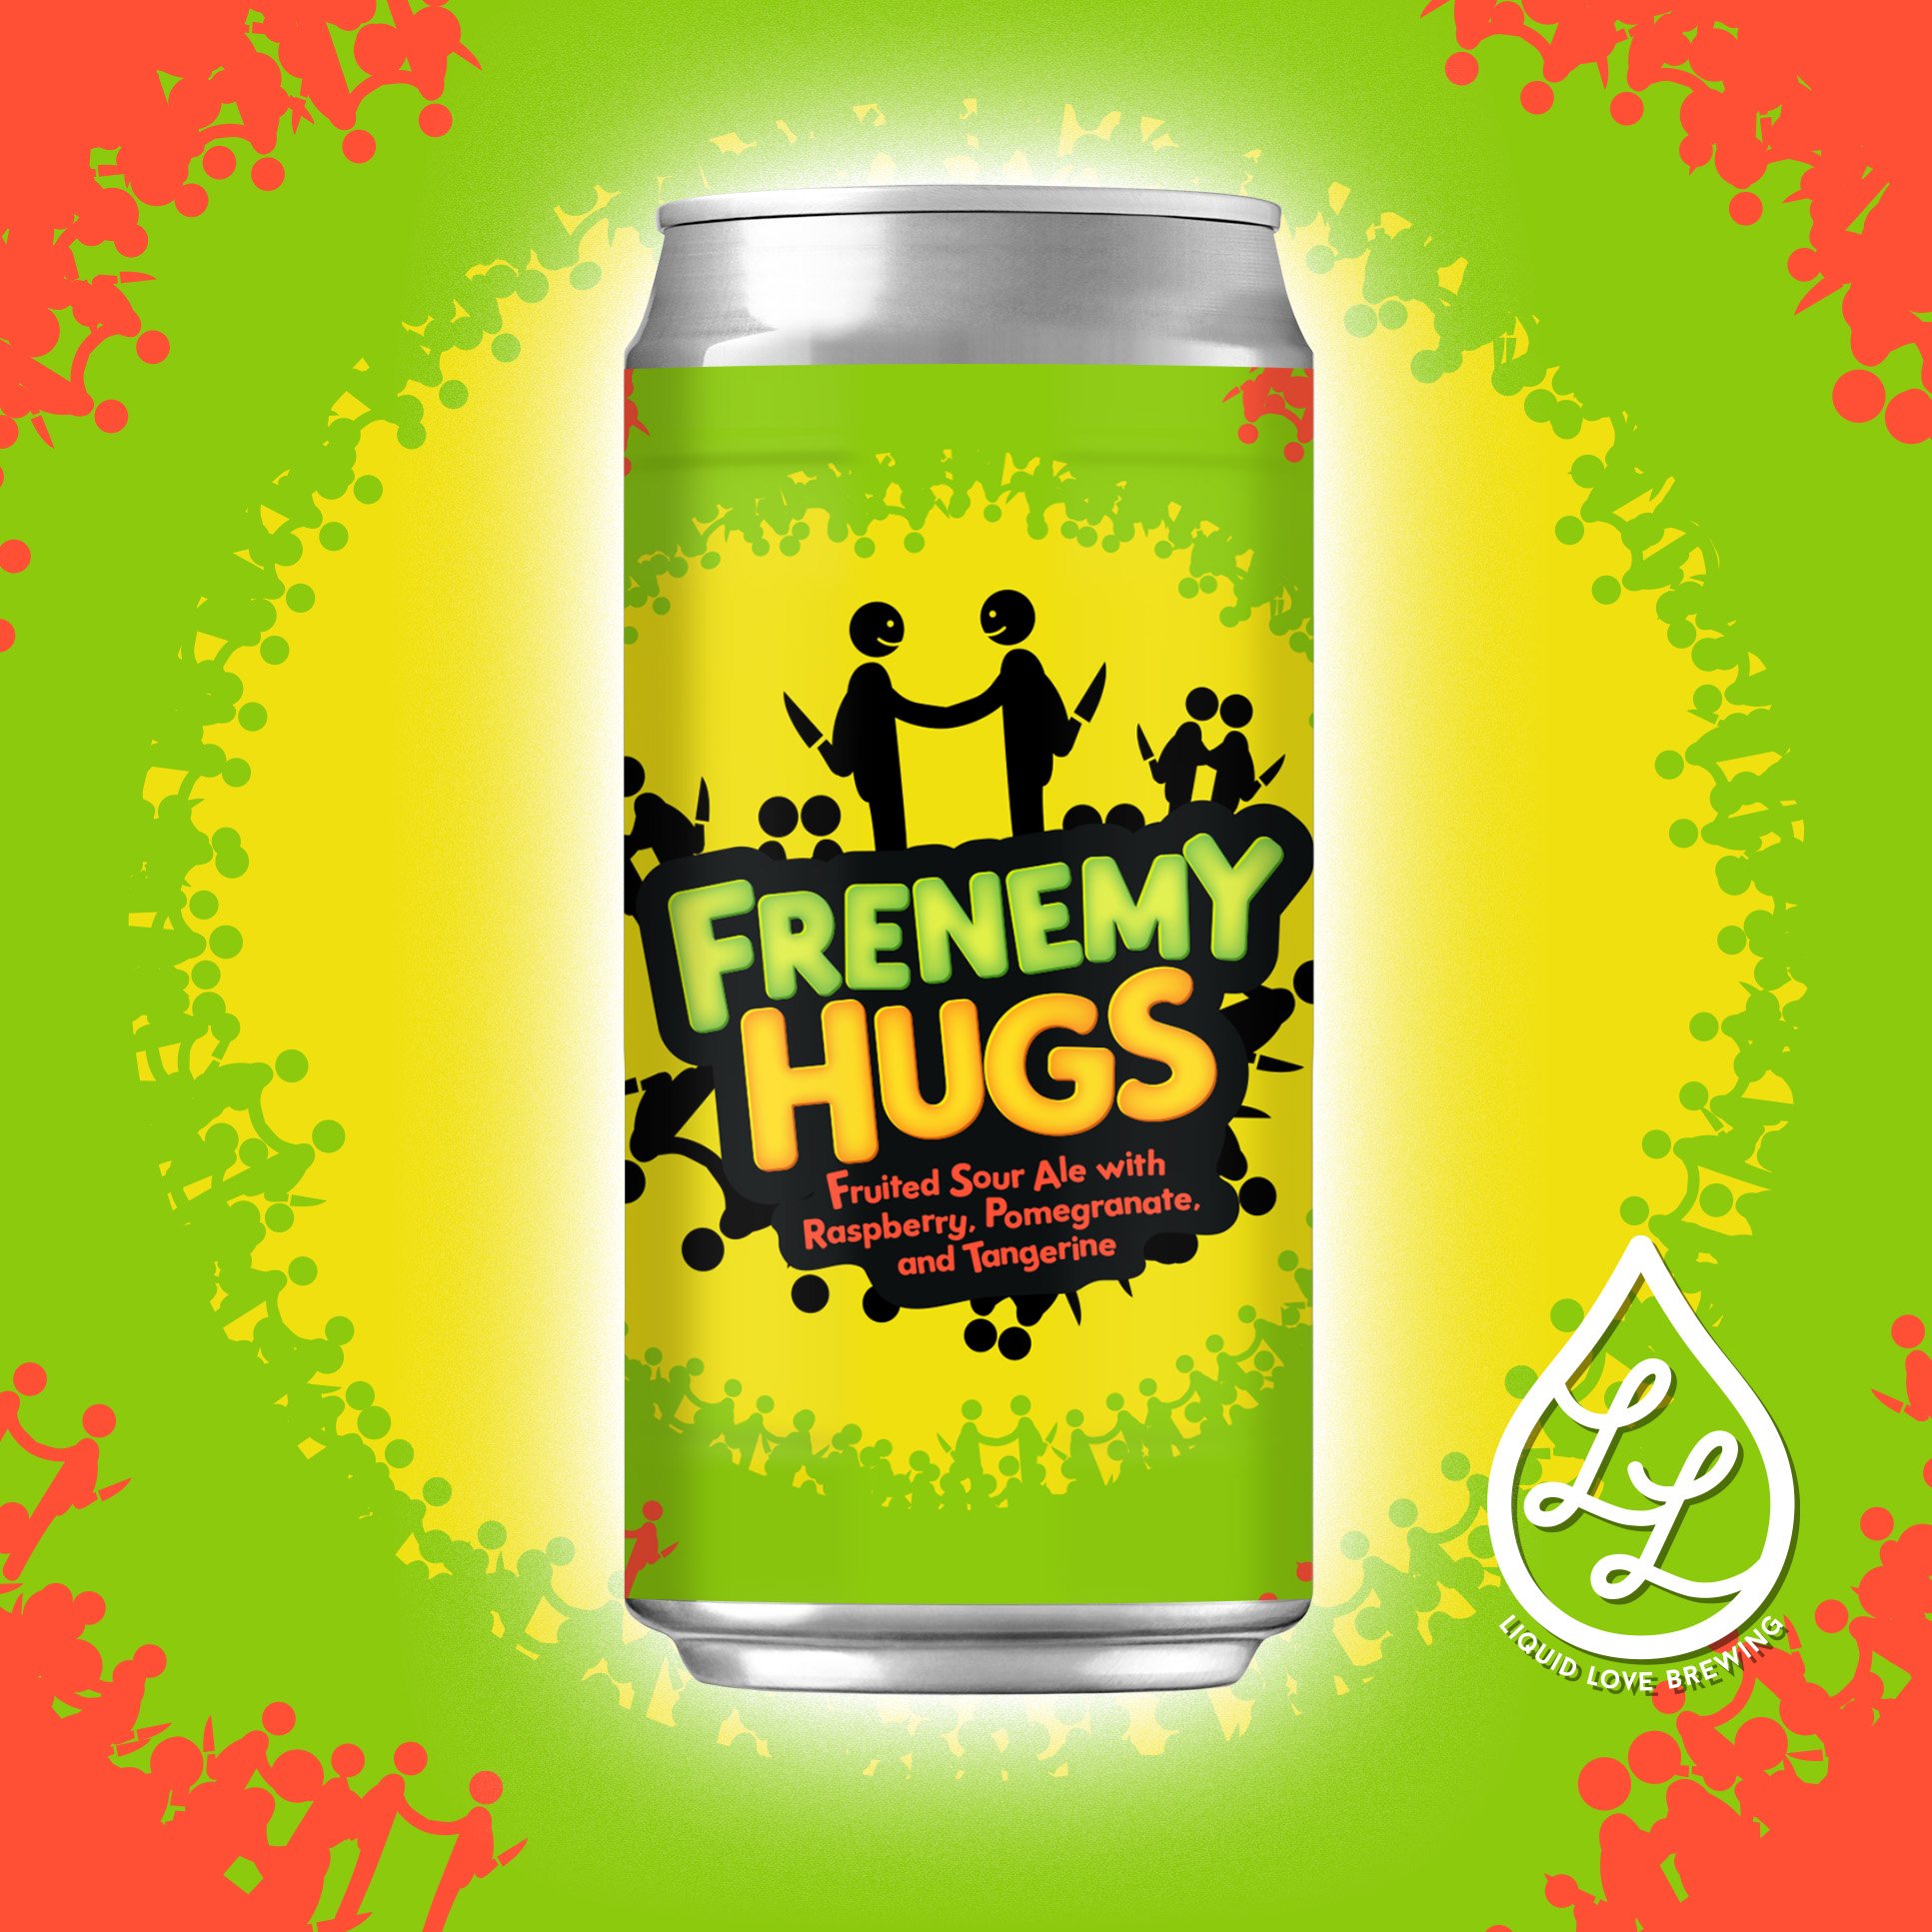 Frenemy Hugs - Fruited Sour Ale